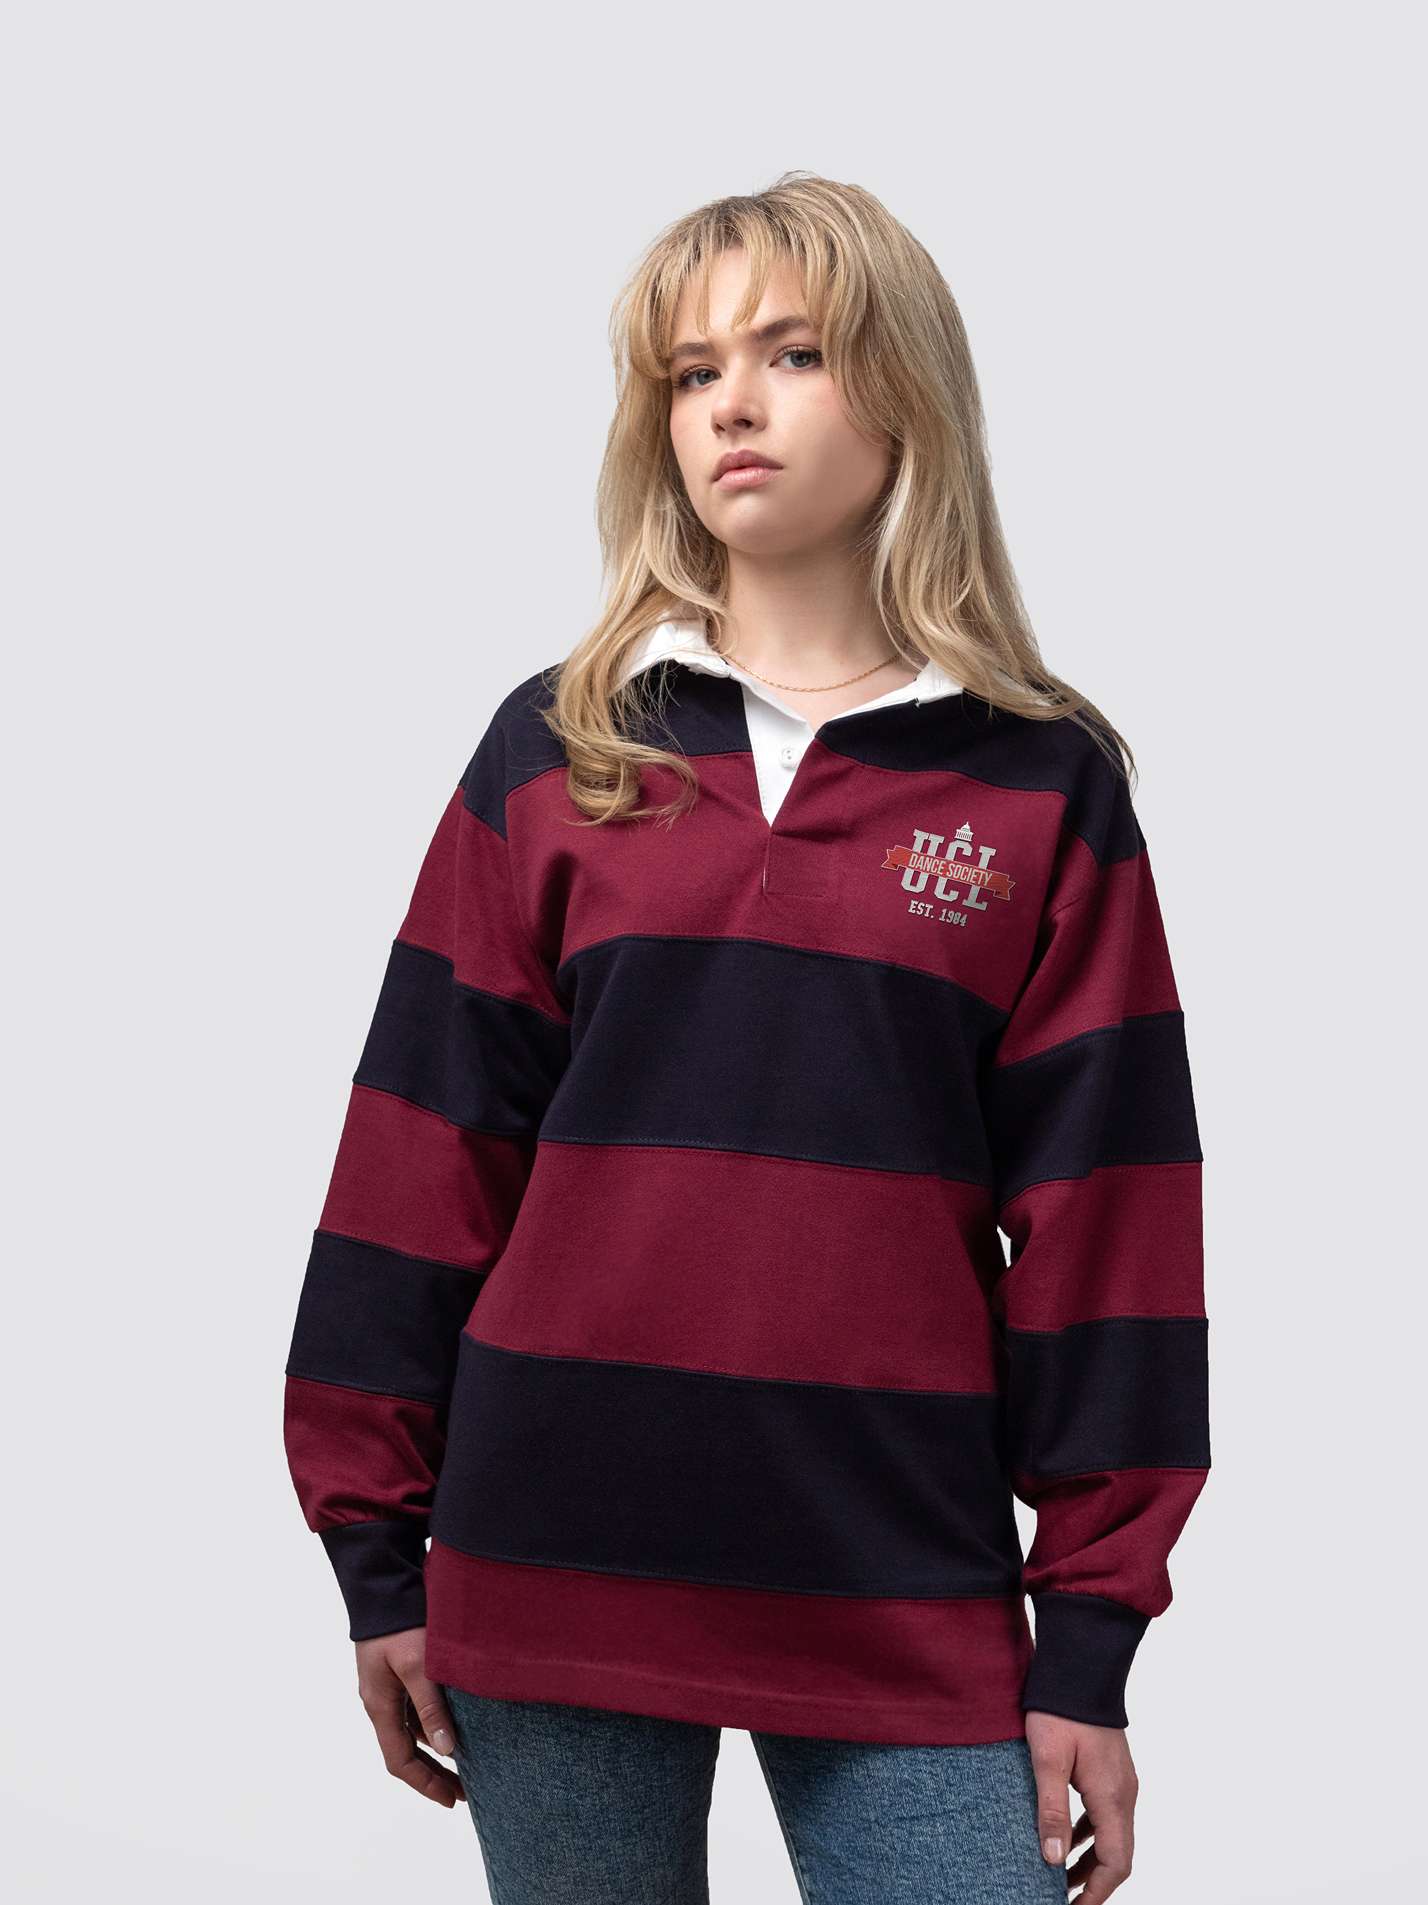 UCL Dance Society Competition Team Unisex Striped Rugby Shirt